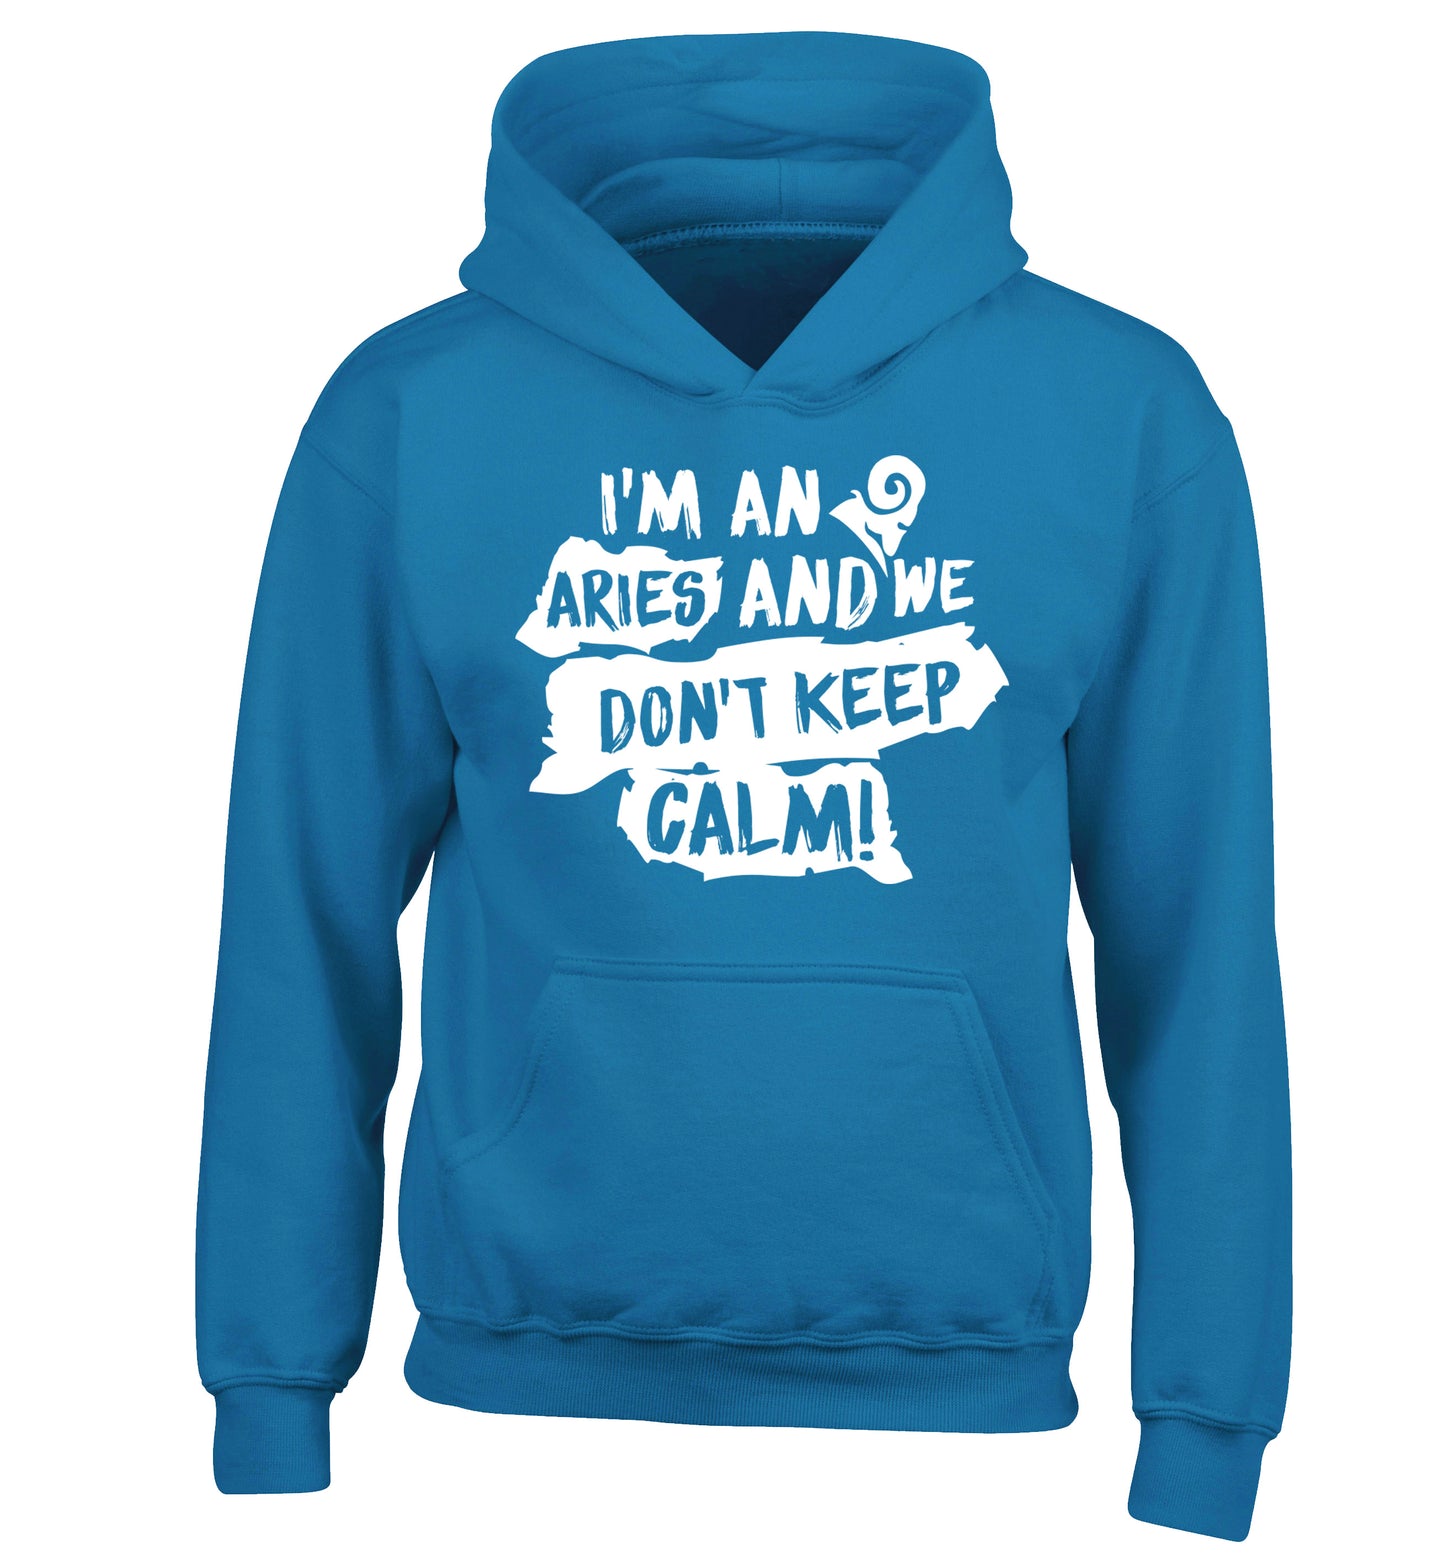 I'm an aries and we don't keep calm children's blue hoodie 12-13 Years